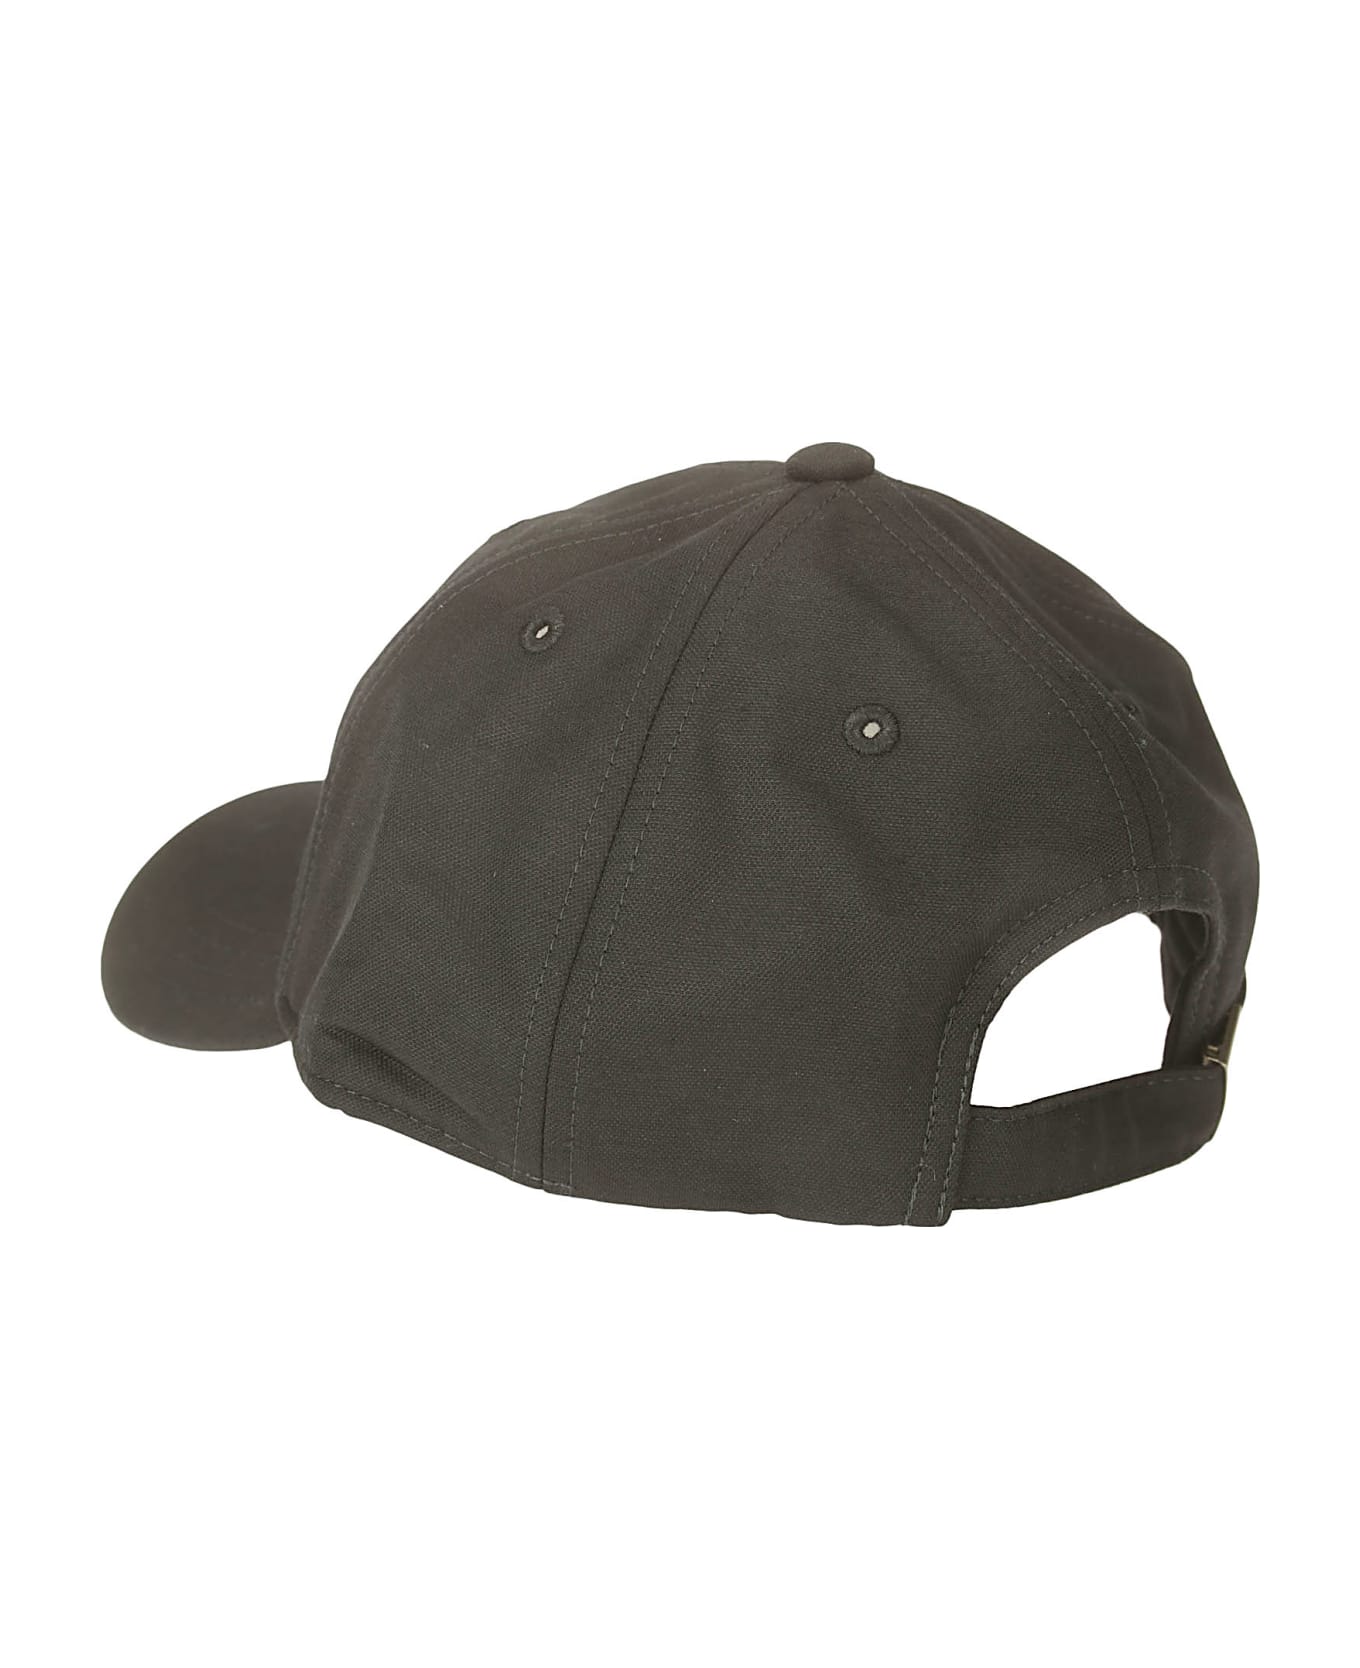 Our Legacy Ballcap - DELUXE BLACK EXQUISITE 帽子